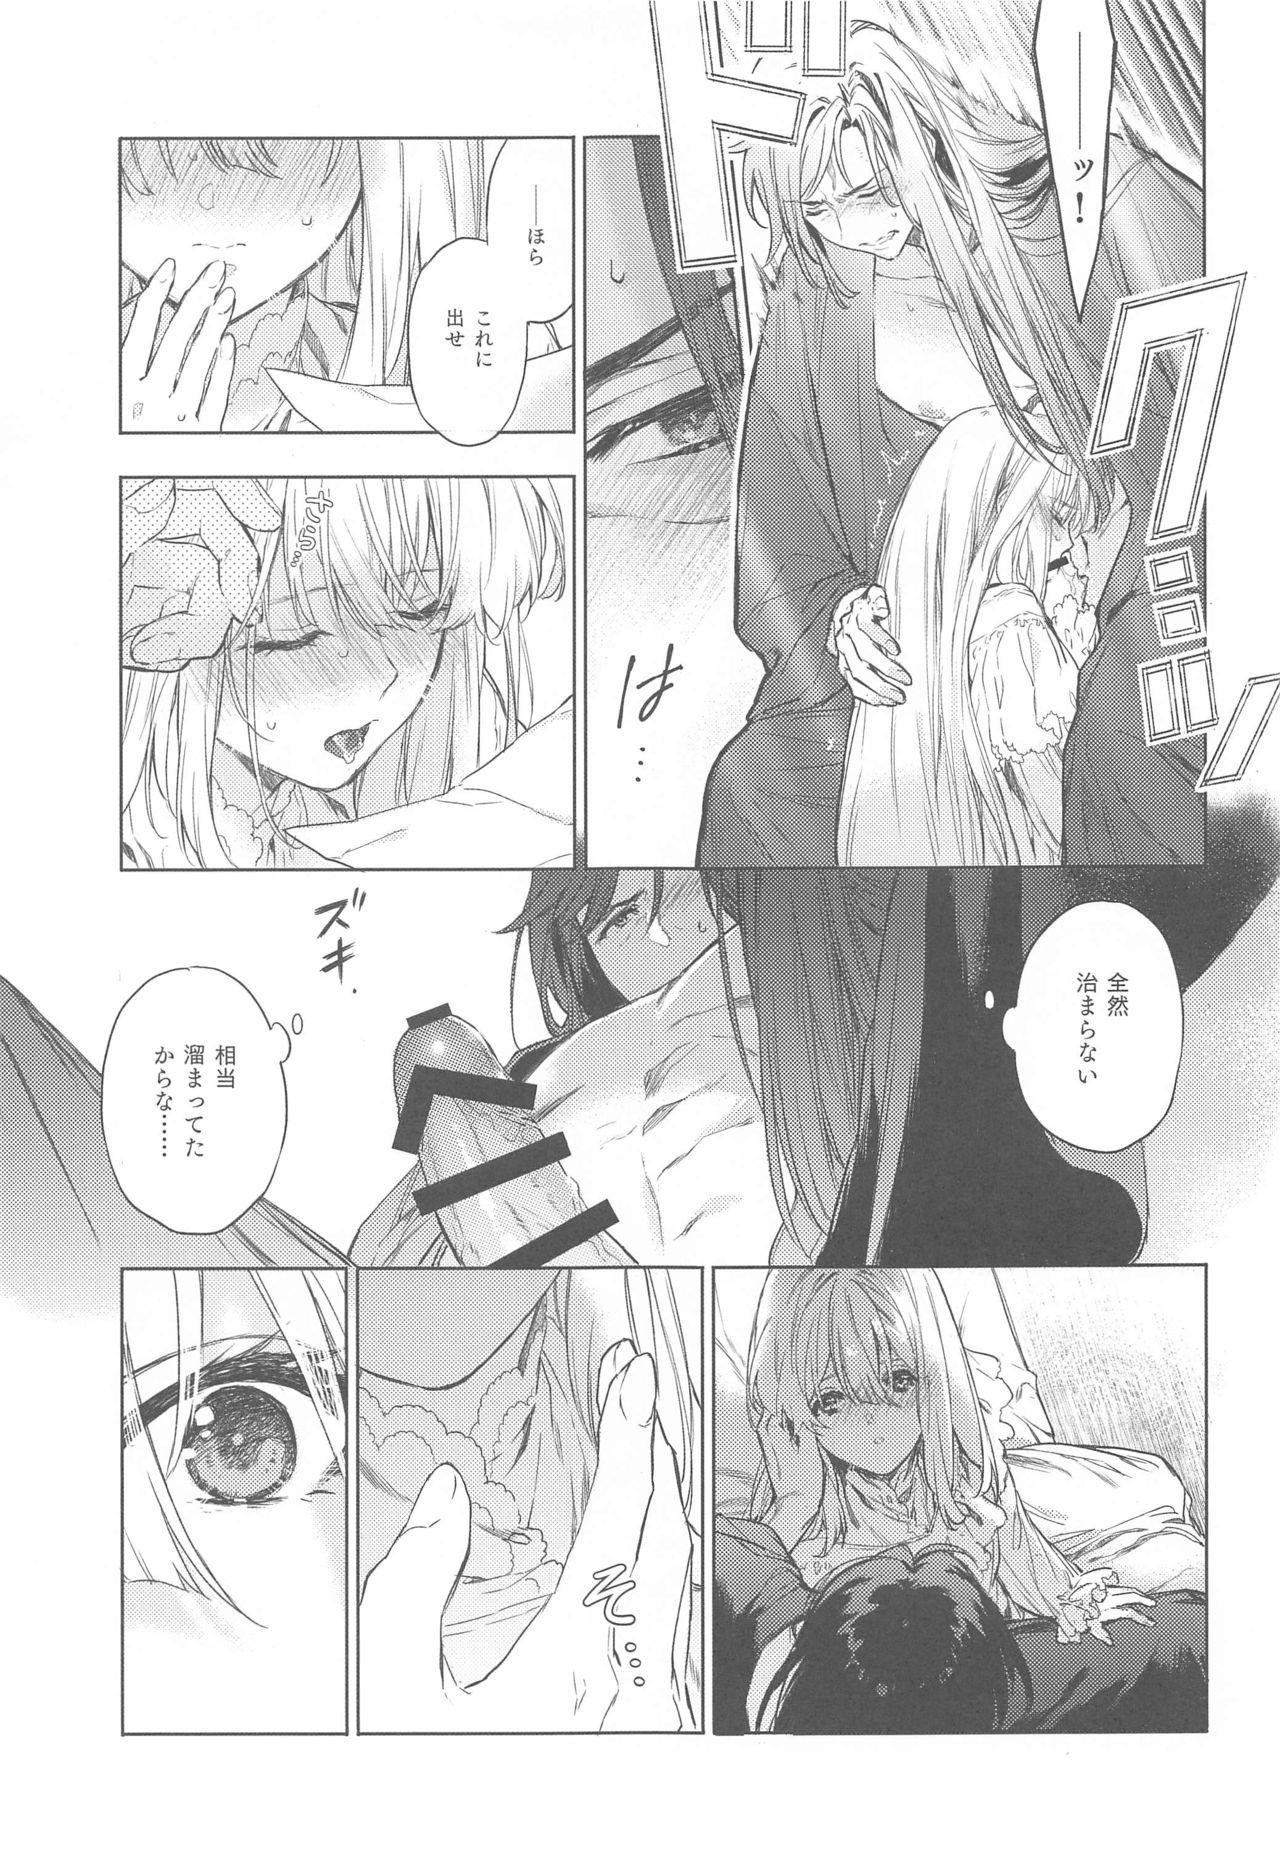 Hardcore Rough Sex Scars of love - Violet evergarden Web Cam - Page 8